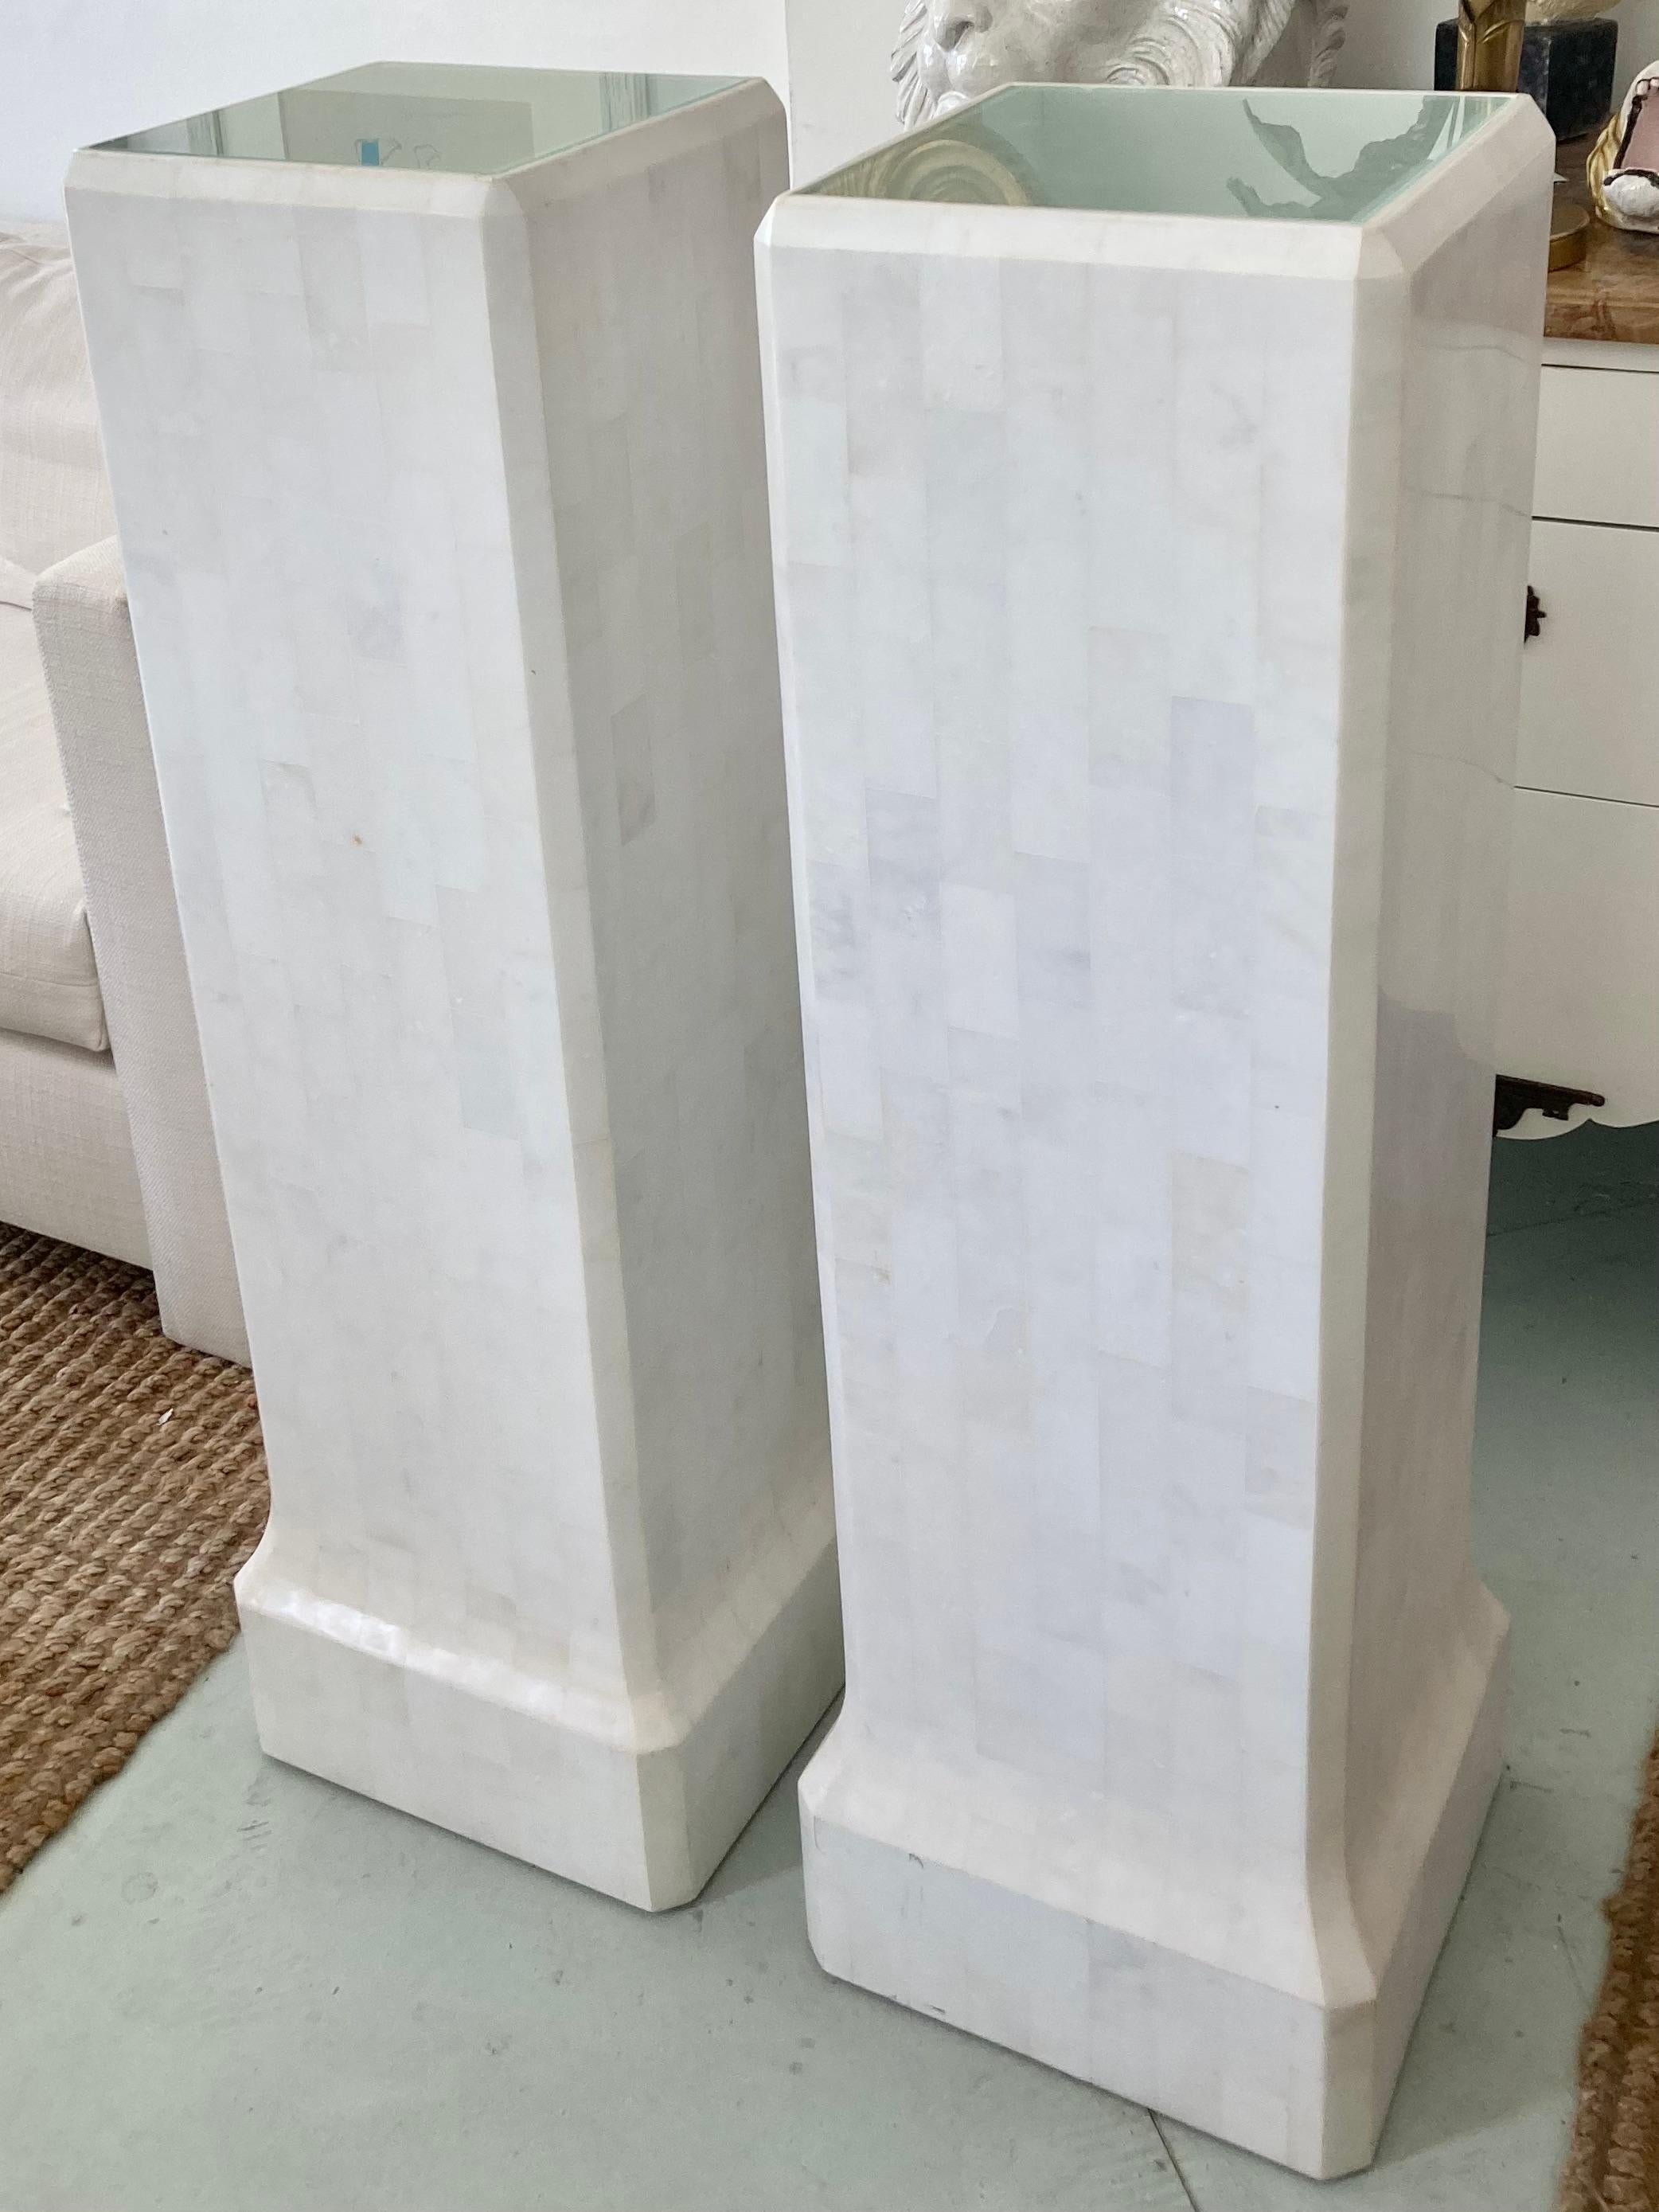 Late 20th Century Tessellated White Marble Pedestals With Lighted Surfaces, a Pair For Sale